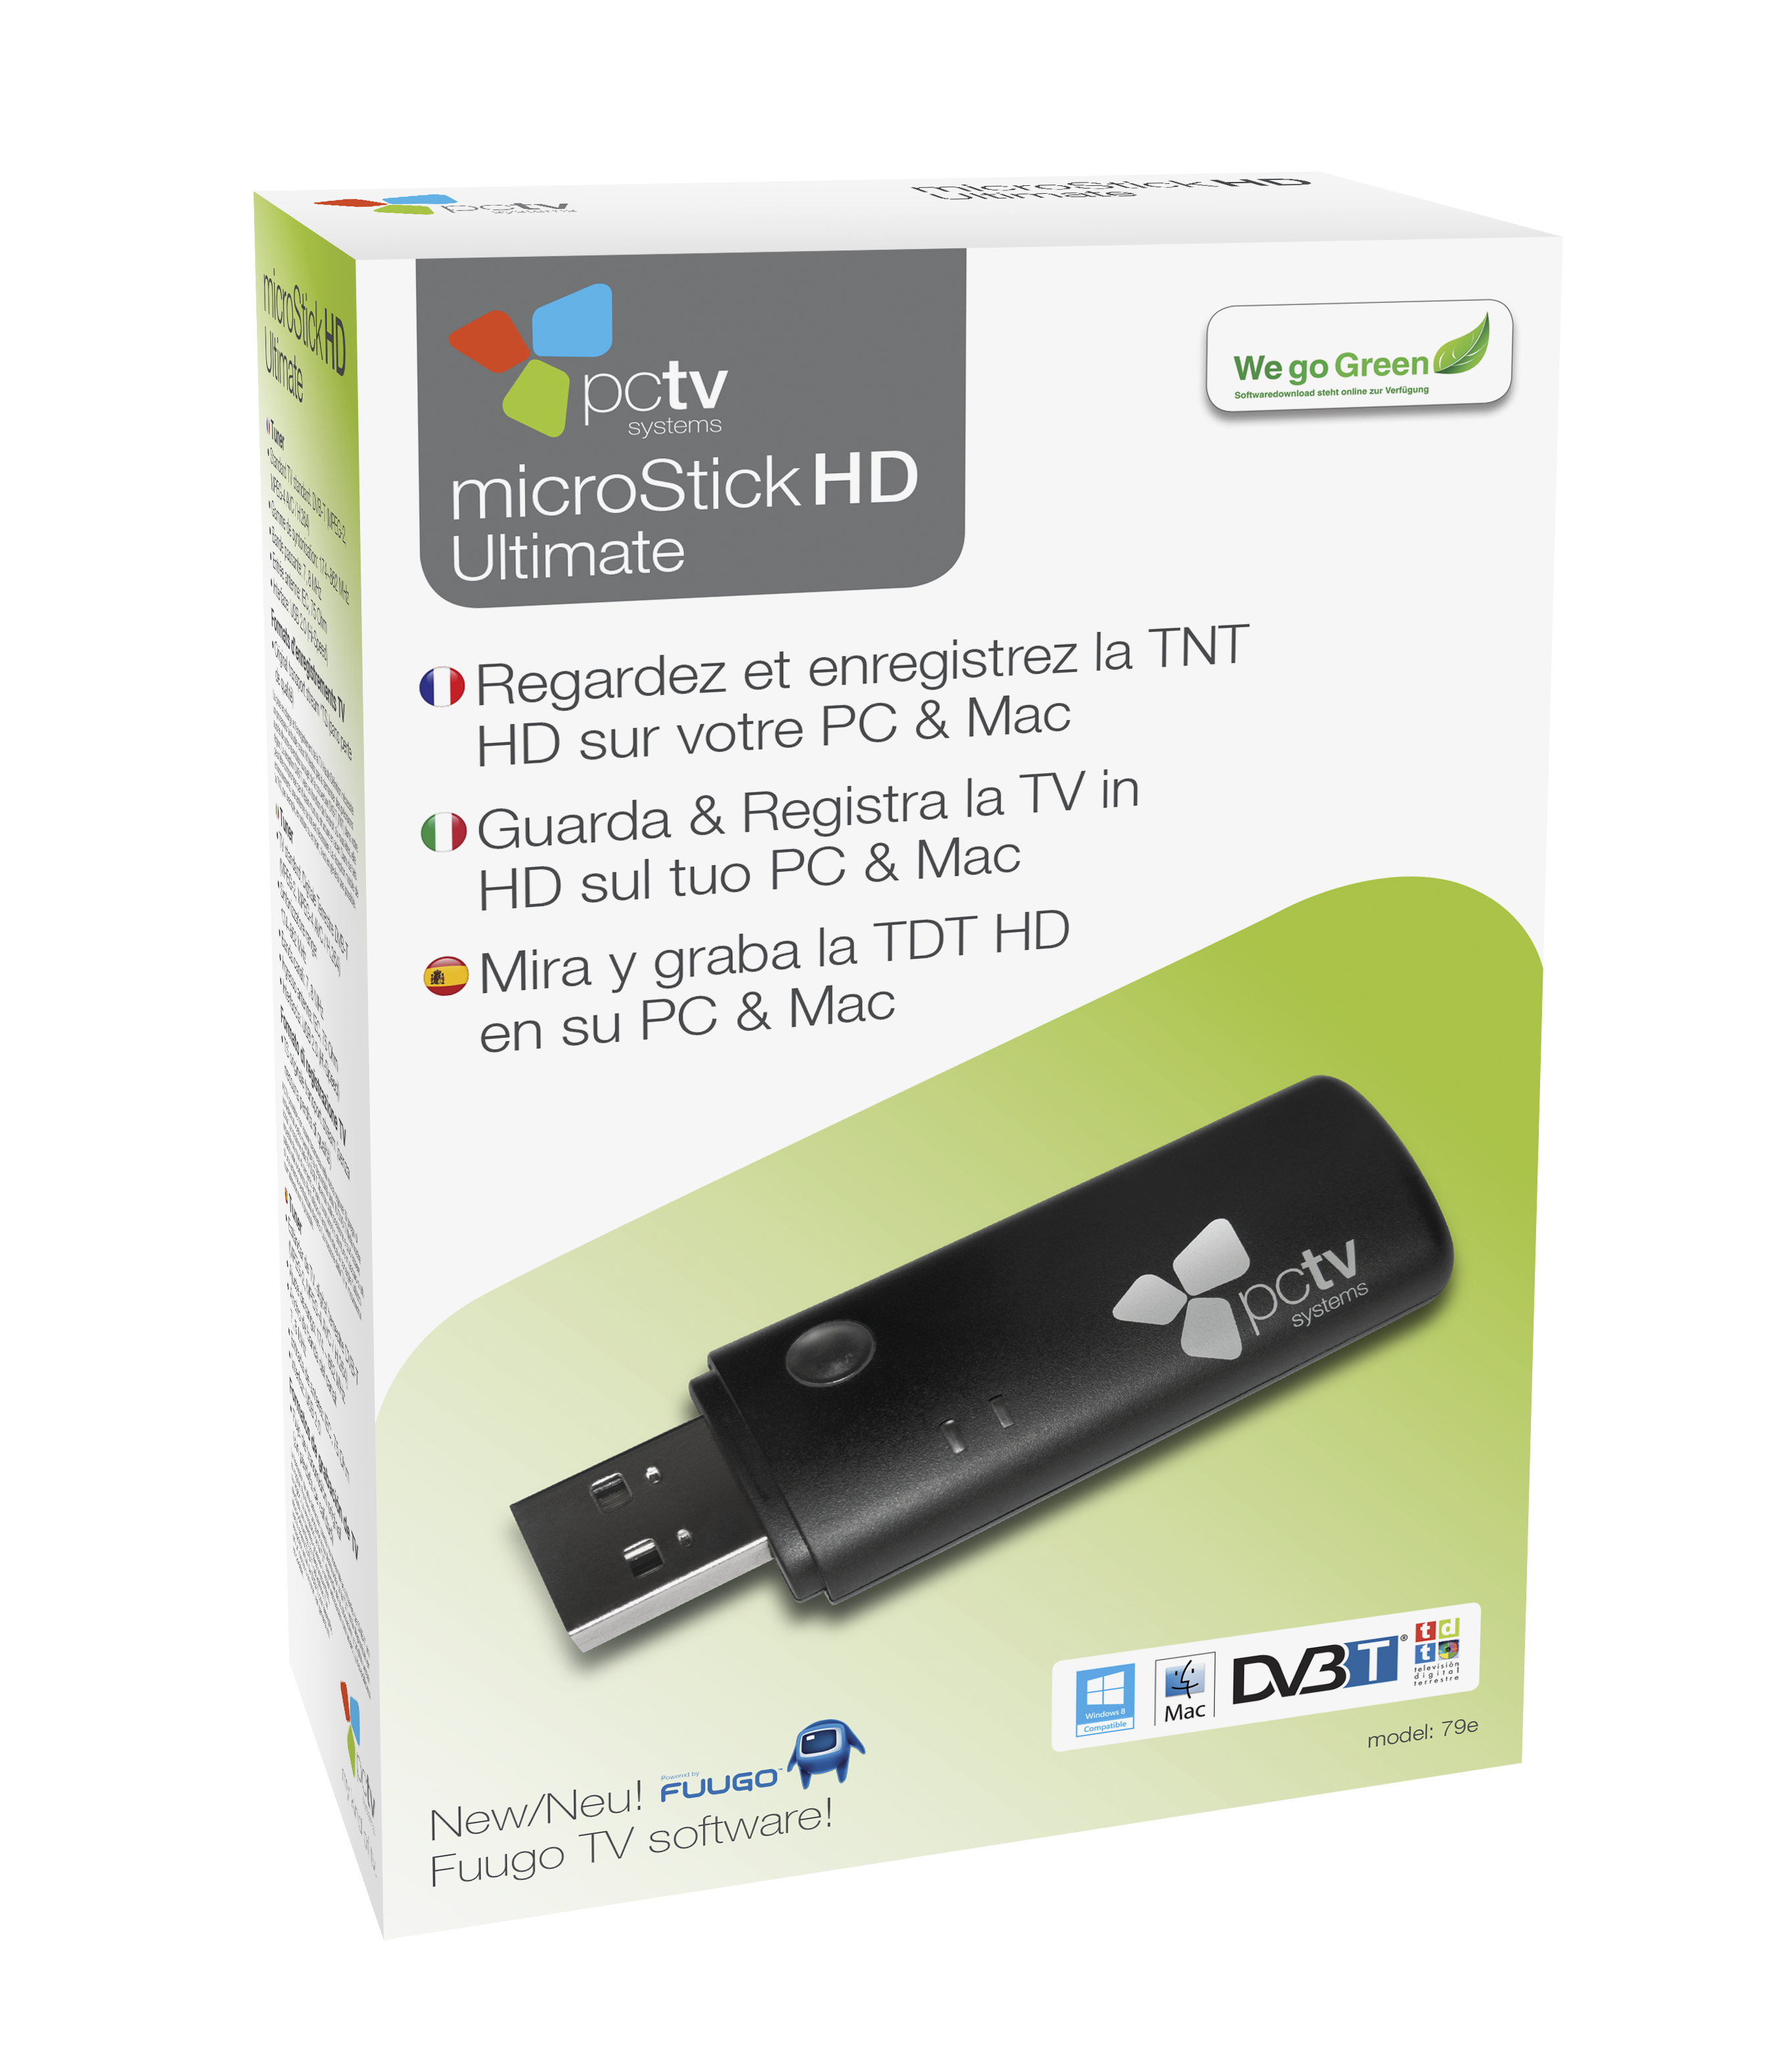 http://www.pctvsystems.com//Portals/pctv/3lang_microStick-HD-Ultimate-79e_3lang_23034.png